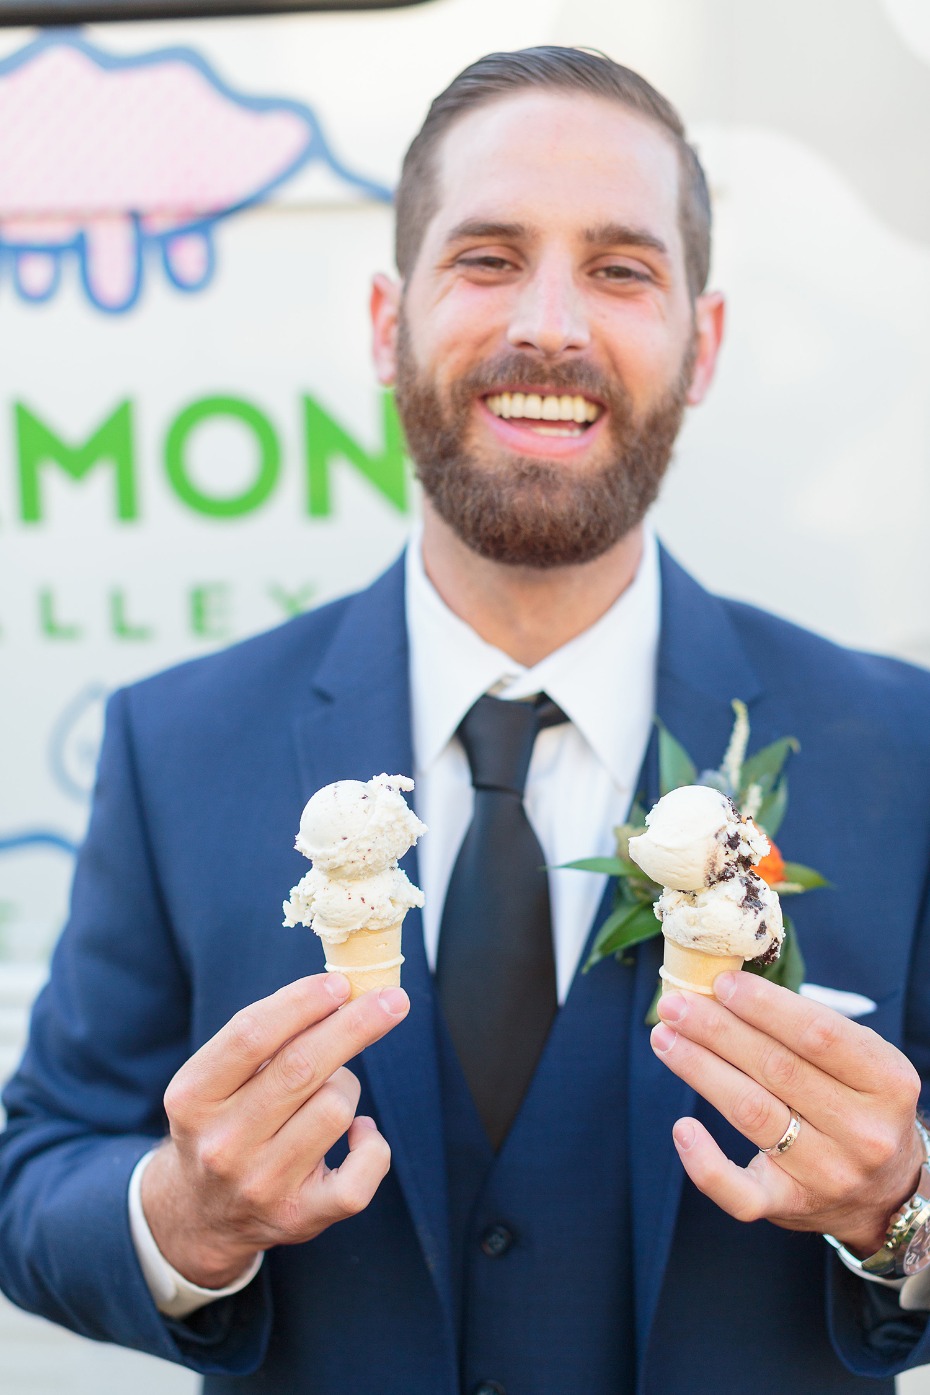 Get an ice cream truck for your wedding